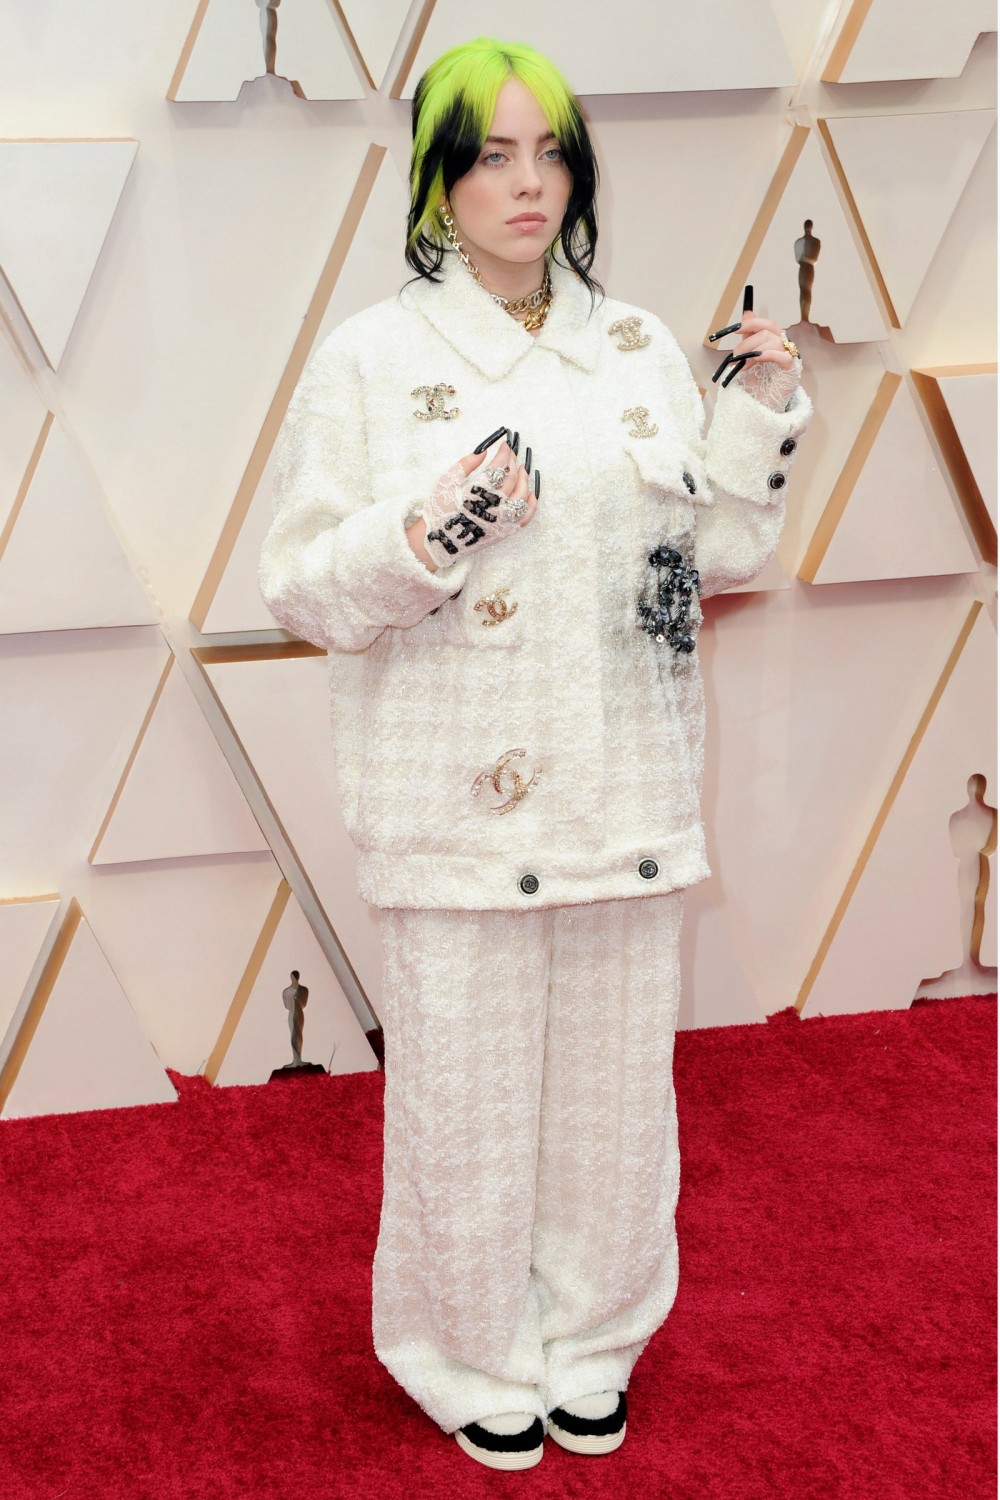 Billie Eilish in Chanel at the 2020 Academy Awards